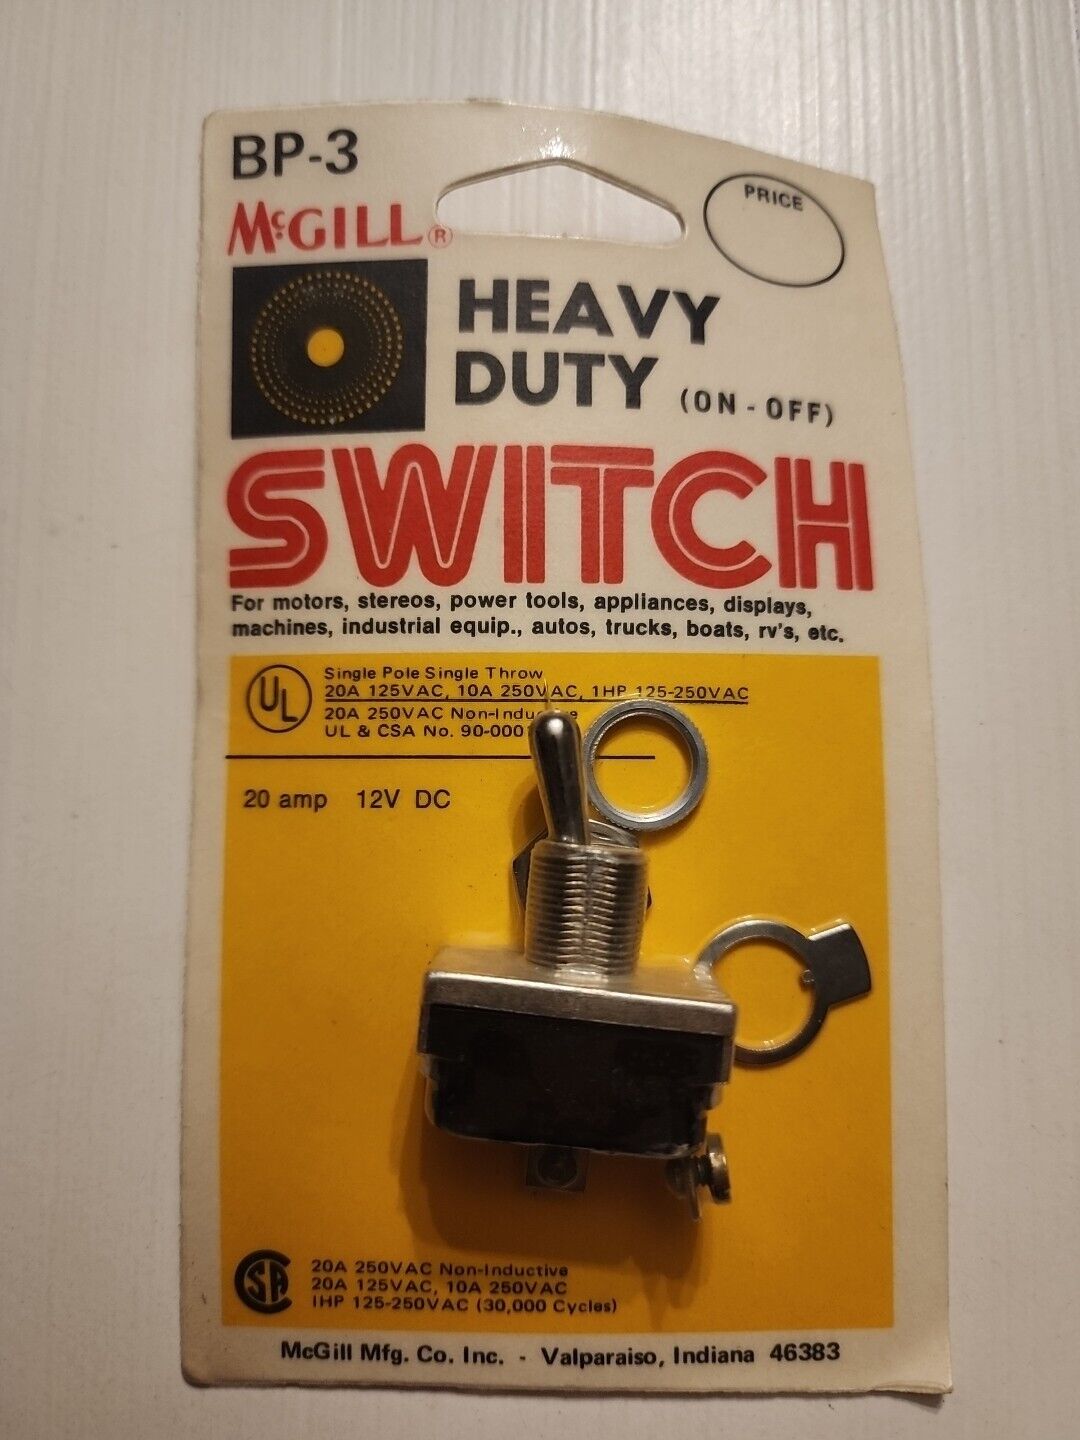 NEW NOS Vintage VTG SWITCH Toggle On/Off 2-Screw  20amp Heavy Duty McGill BP-3